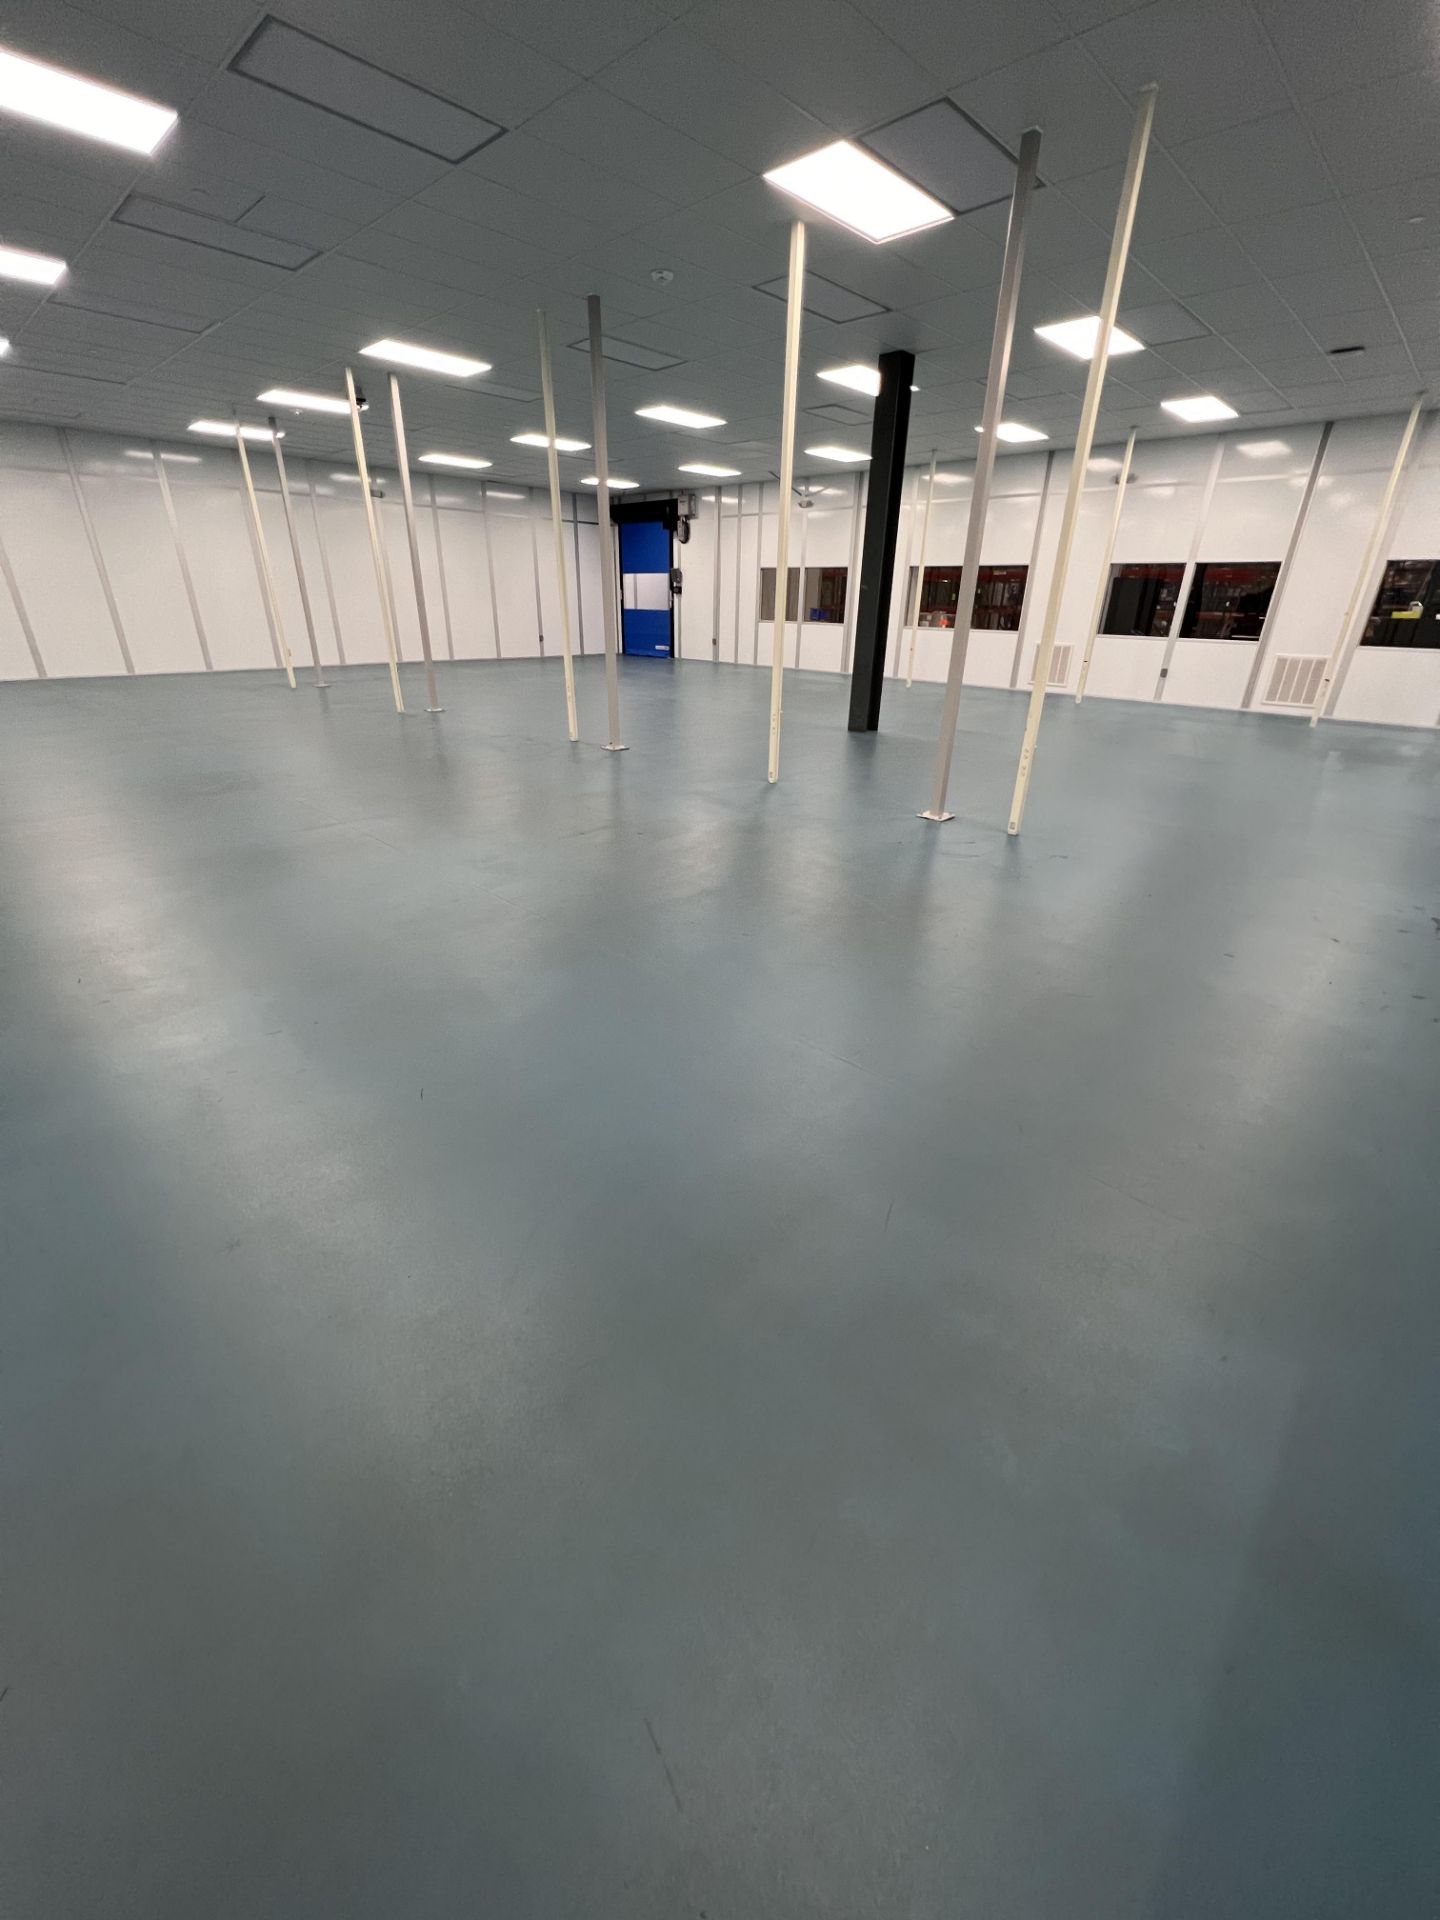 MODULAR CLEAN ROOM, APPROX. 60 FT X 60 FT X 11 FT 10 IN, INCLUDES HEPA FILTRATION UNITS - Image 22 of 34